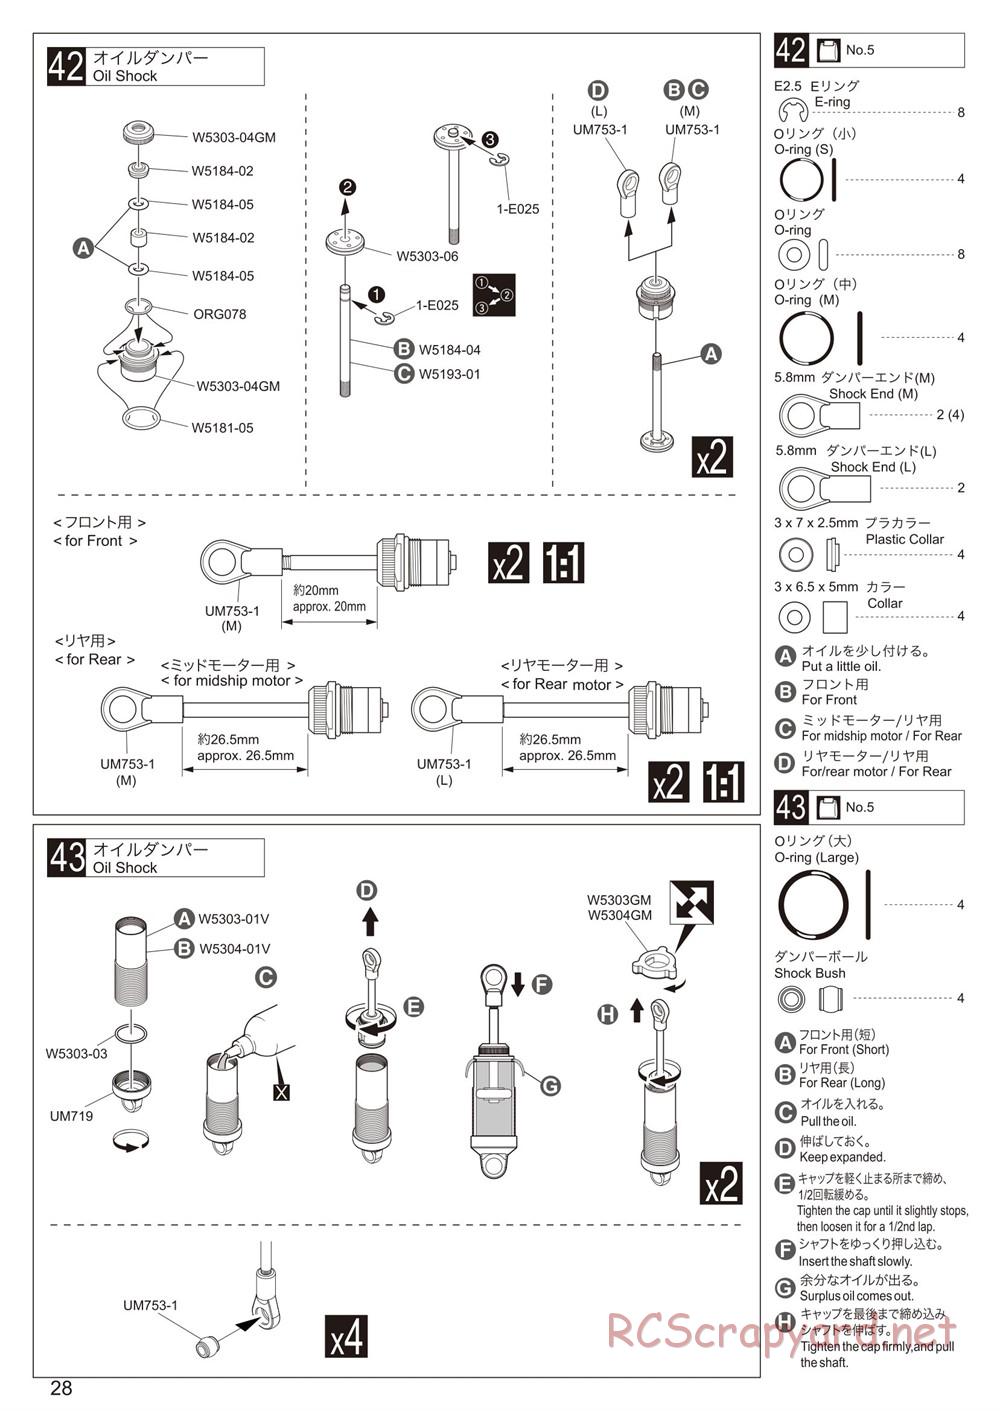 Kyosho - Ultima RB6 (2015) - Manual - Page 28